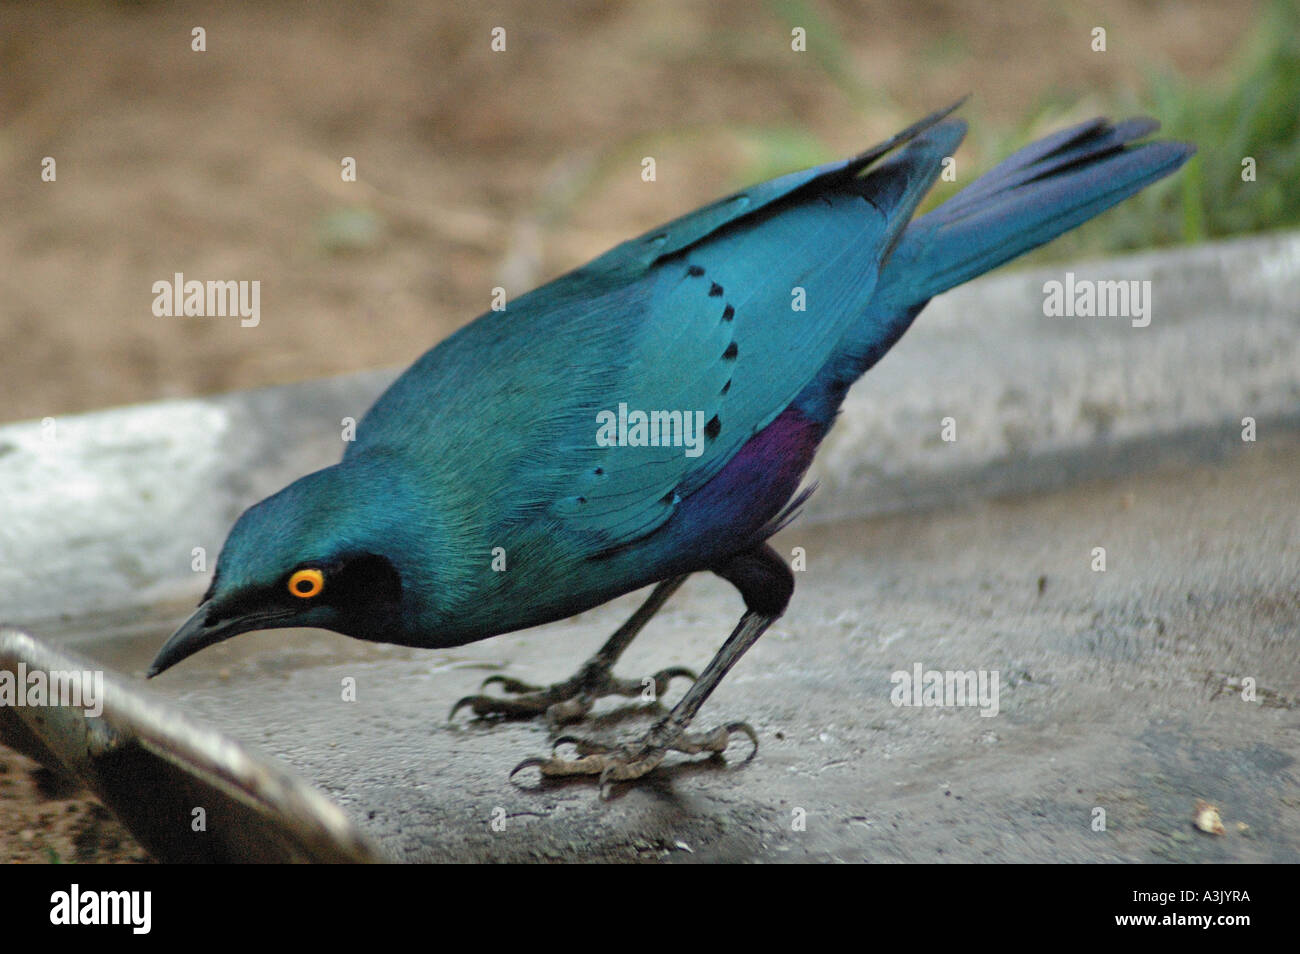 Cape Glossy Starling (Lamprotornis nitens), Kruger National Park, South Africa. Stock Photo